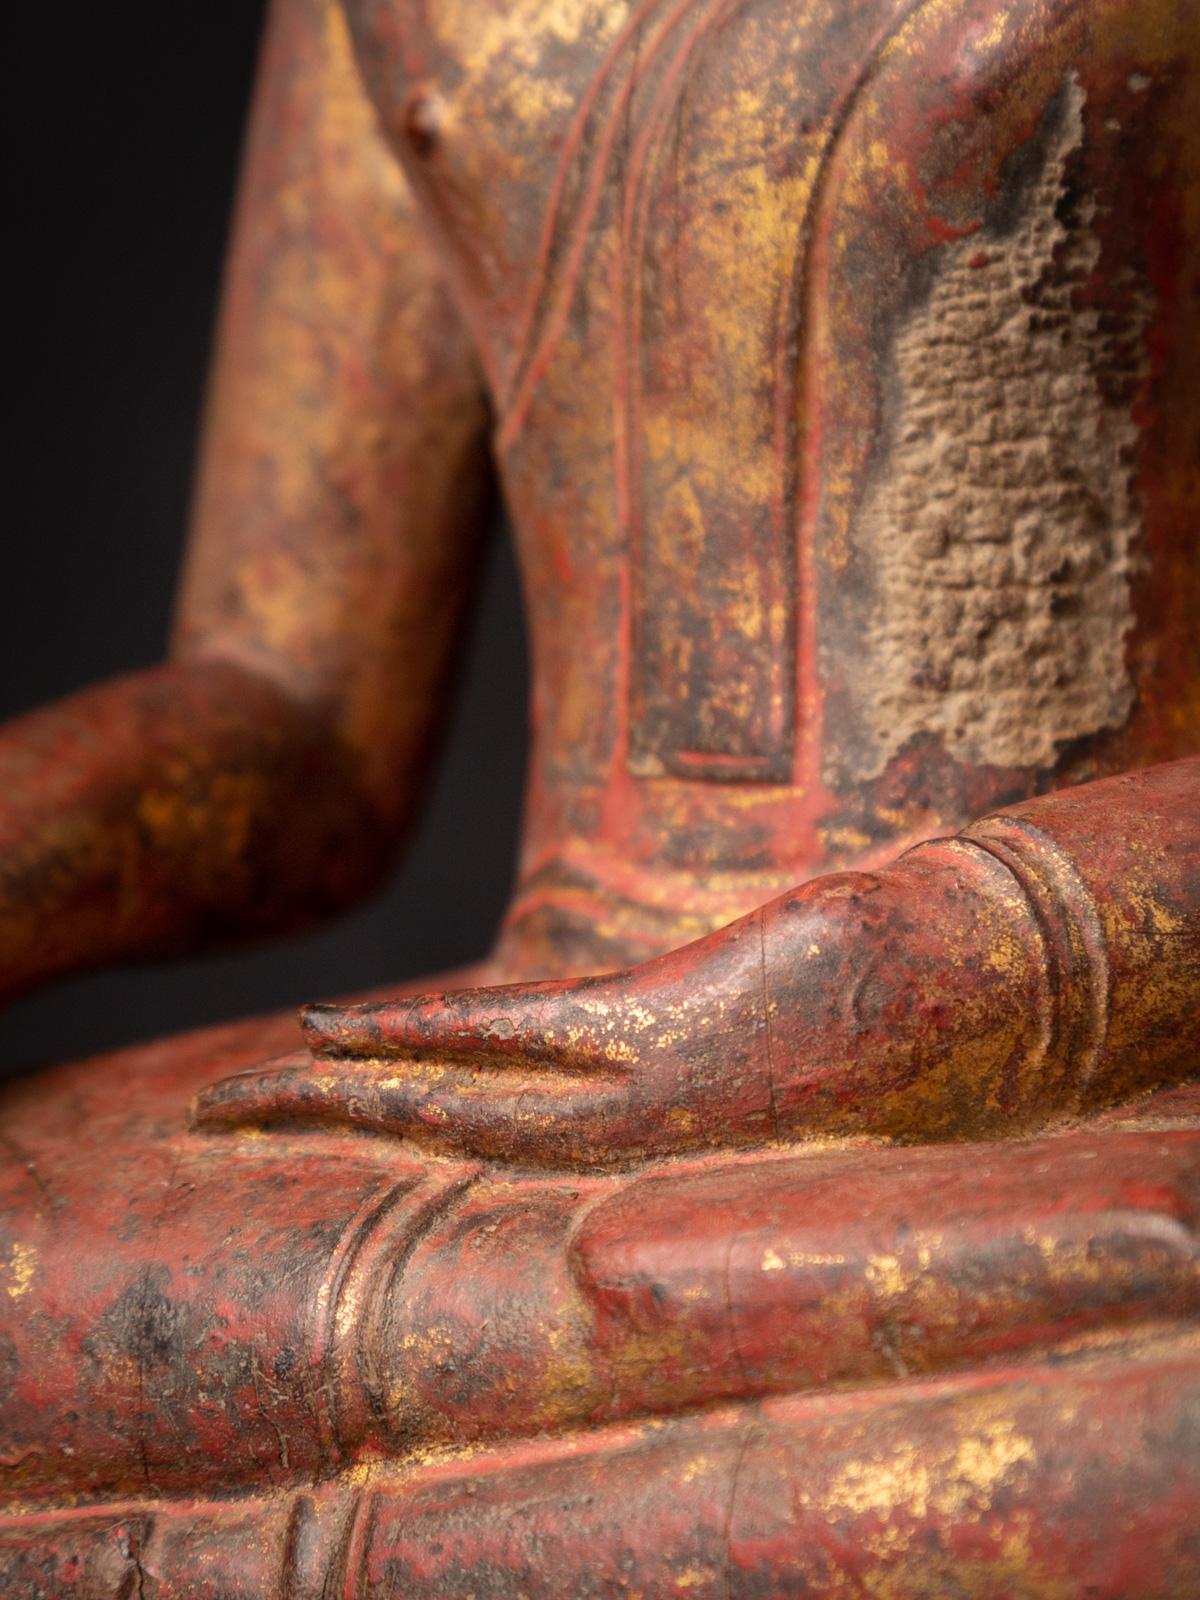 this statue from china was created about 1500. what do the buddha's hand gestures symbolize